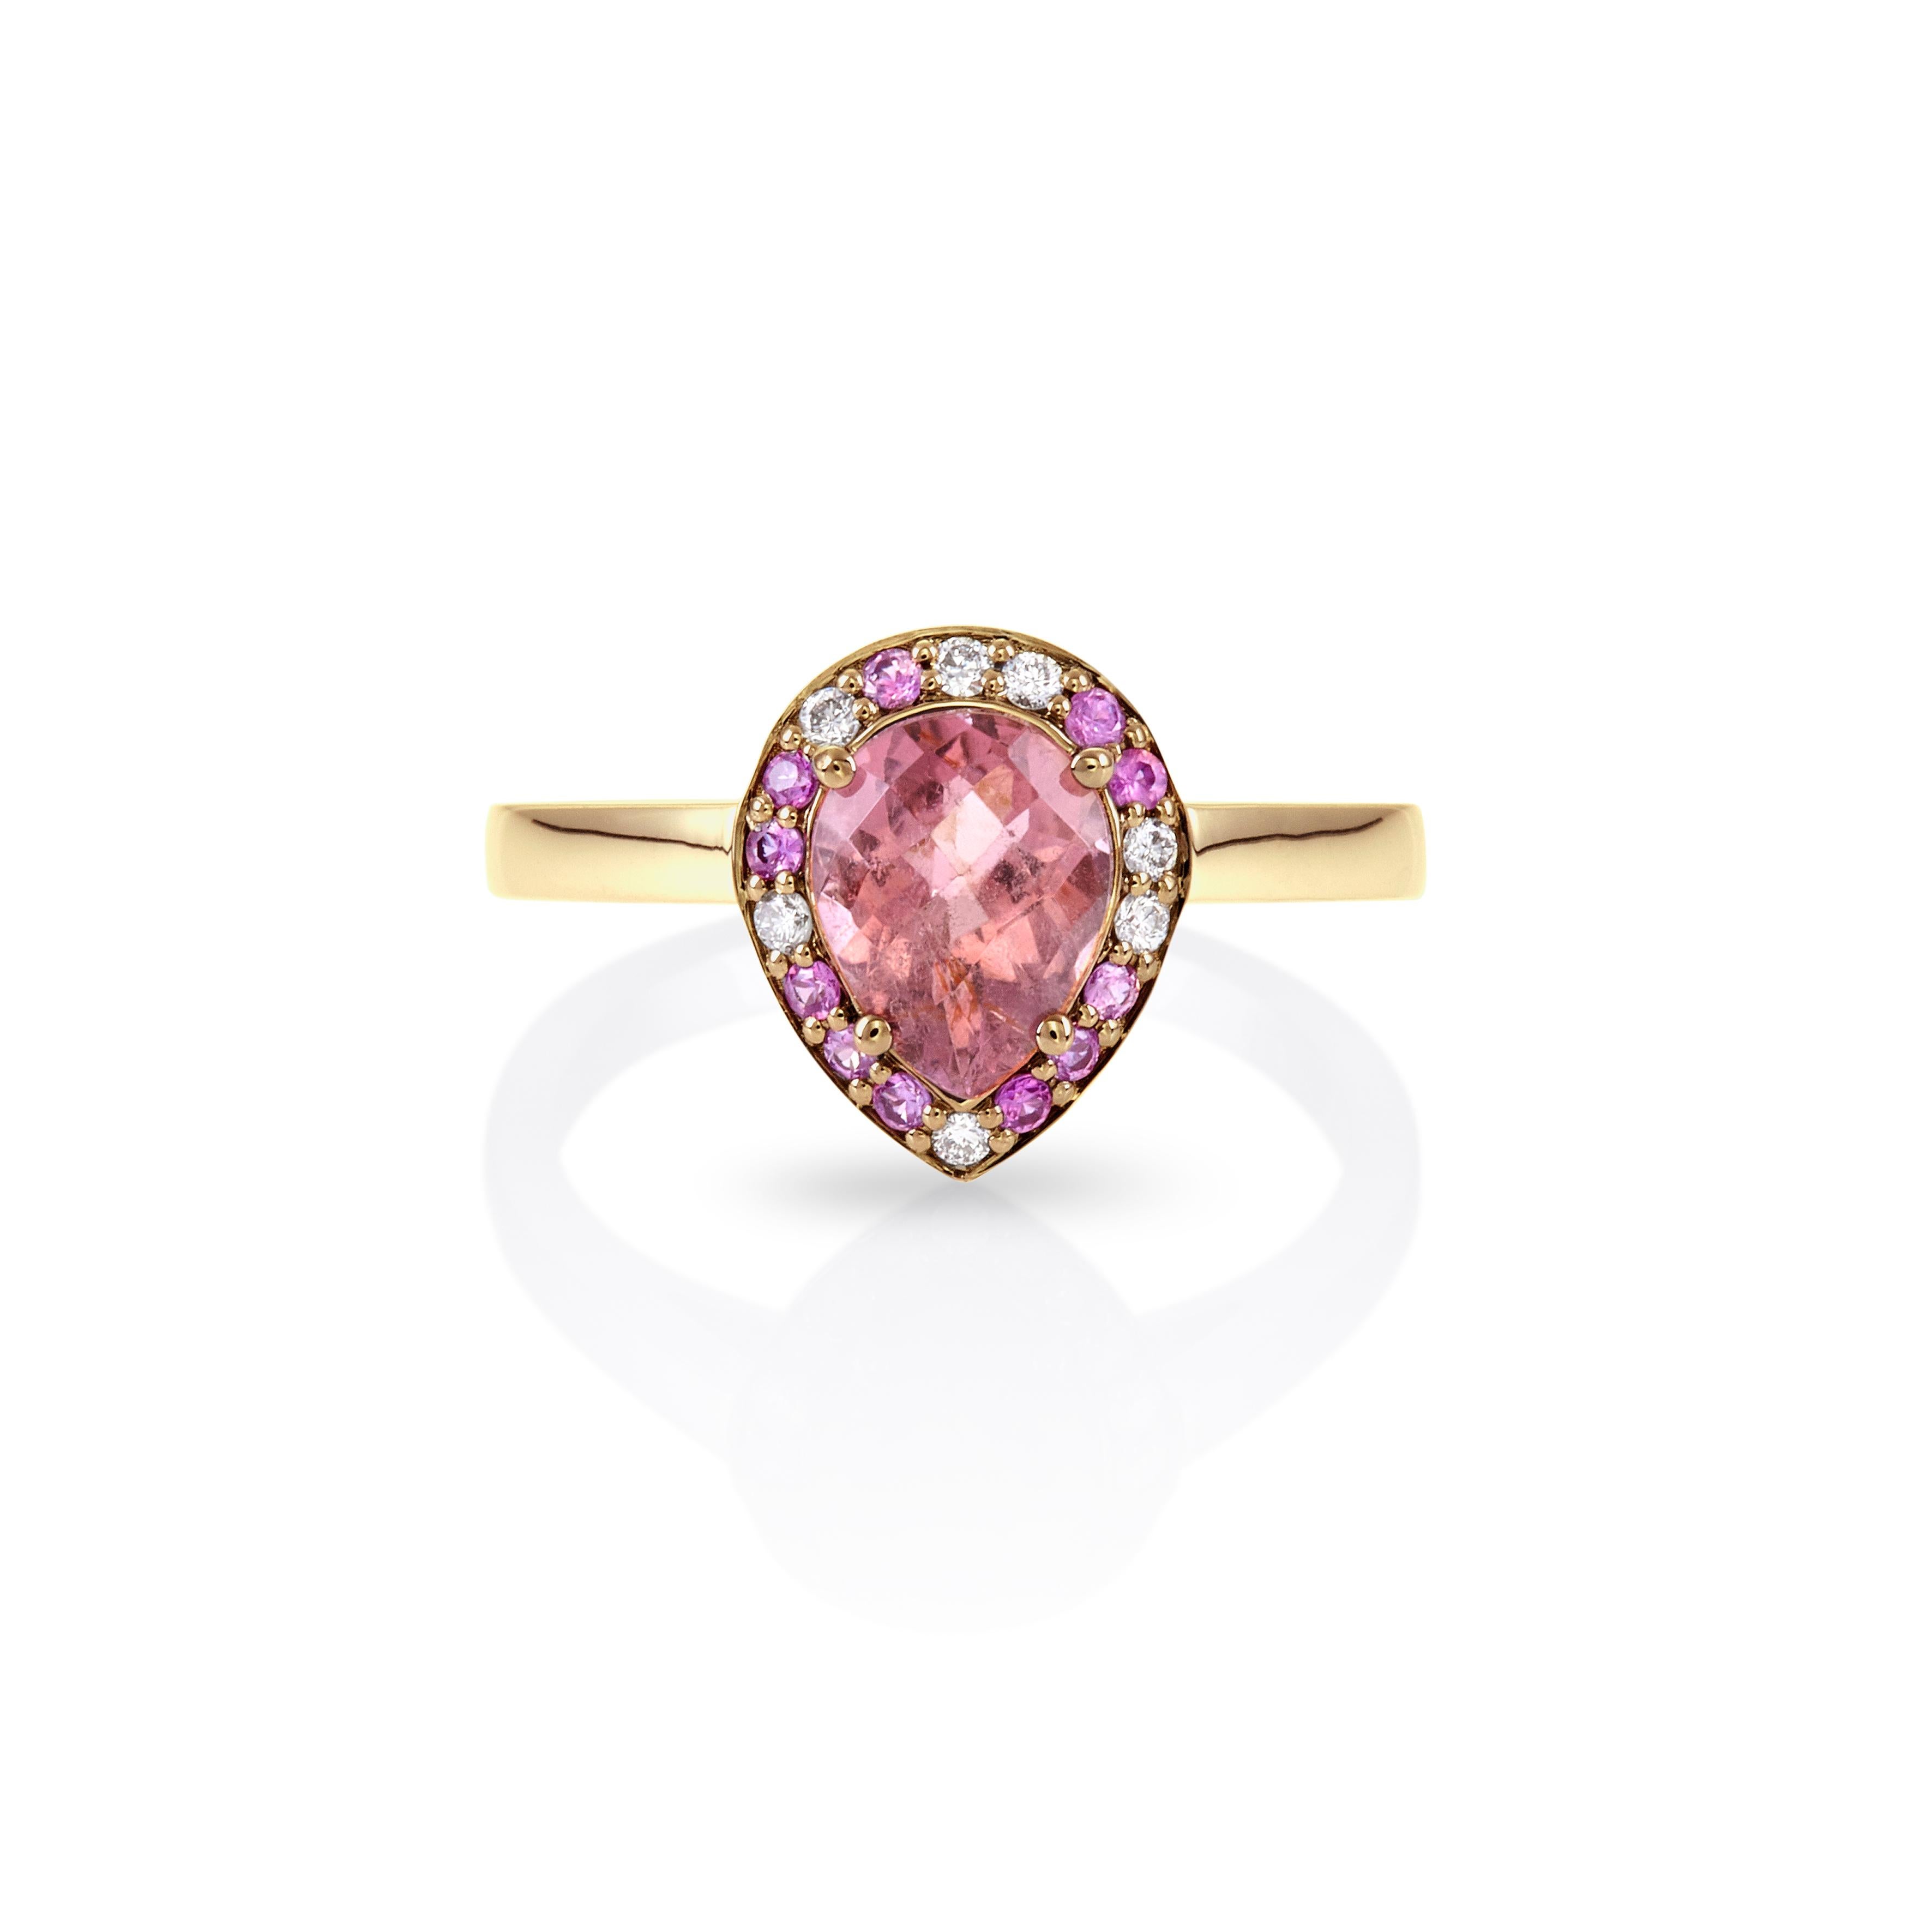 For Sale:  Colorful Drop Ring 18Kt White Gold with Red Tourmaline Pink Saphires and Diamond 5